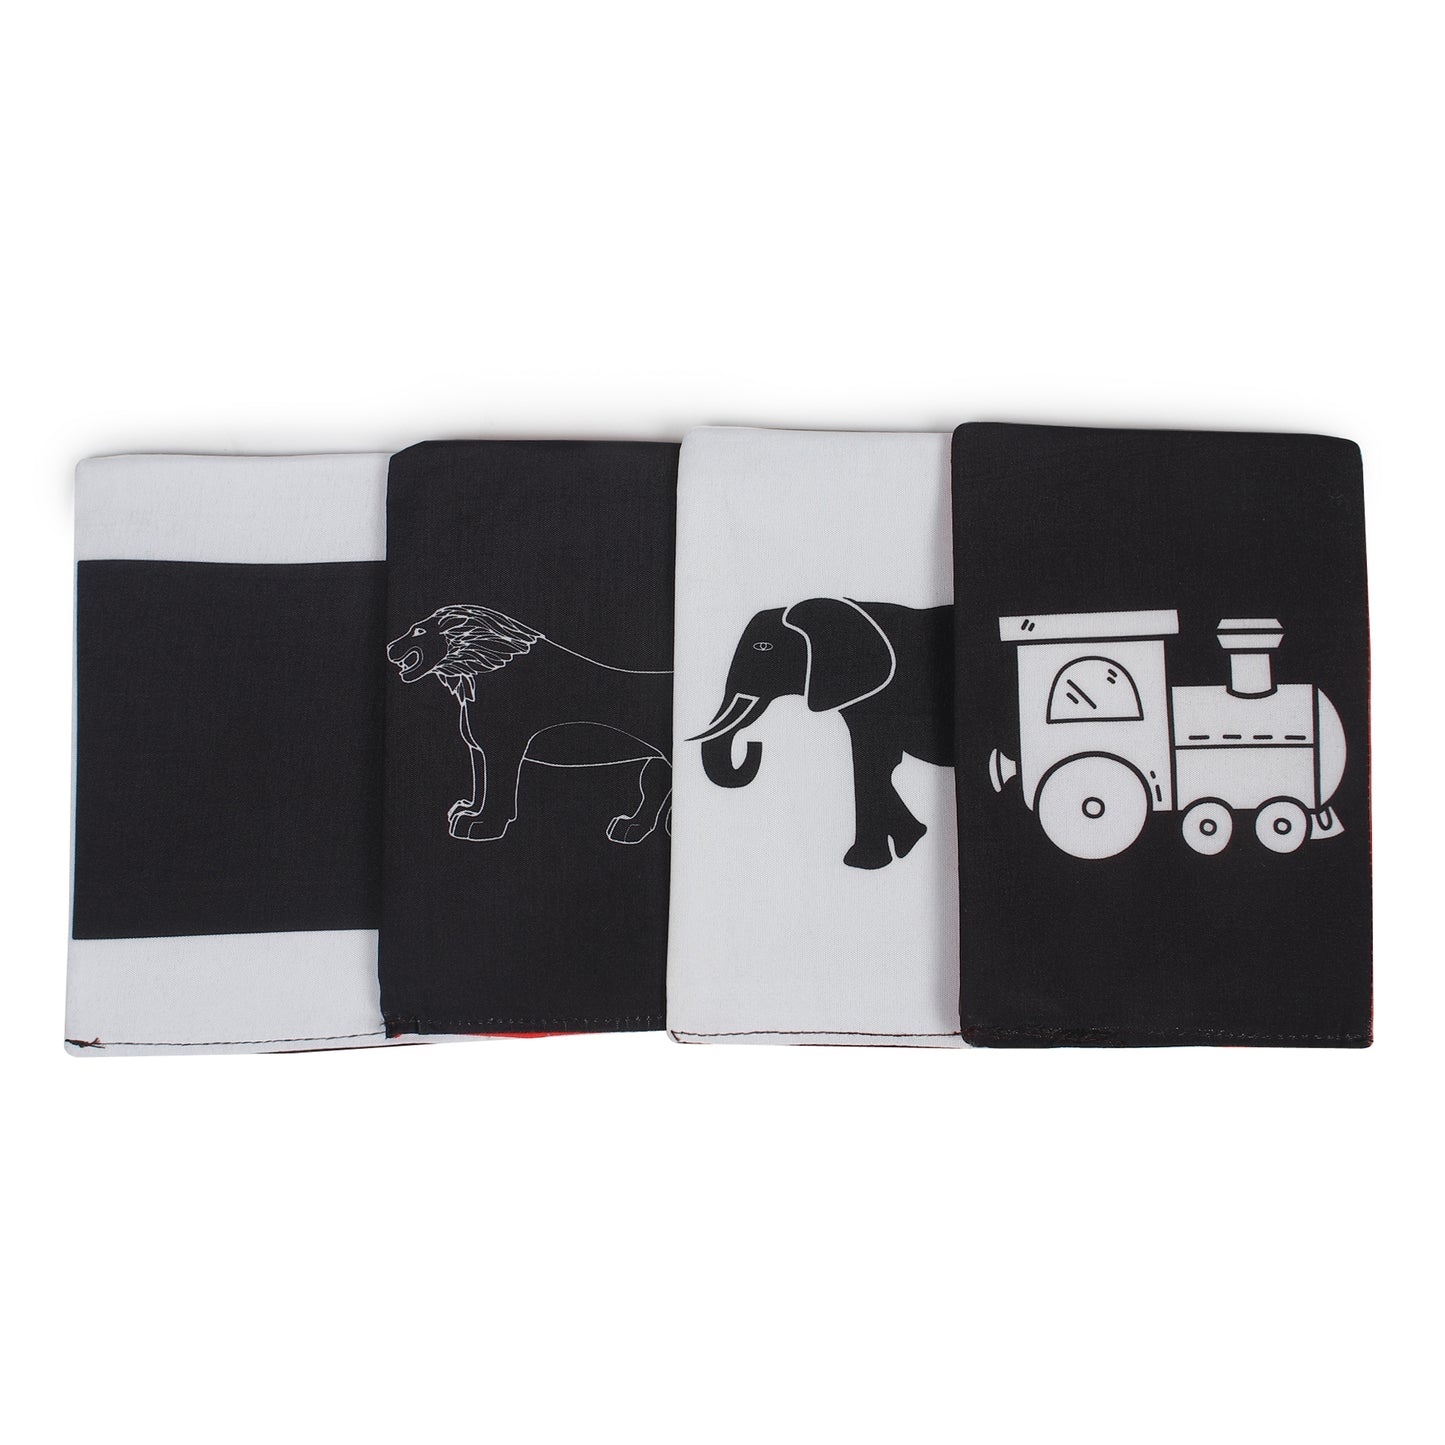 PiK A BOO Cloth Black and White High Contrast Flash Cards l Kids Early Learning l Brain Development Study Material for Preschoolers and Kindergarten